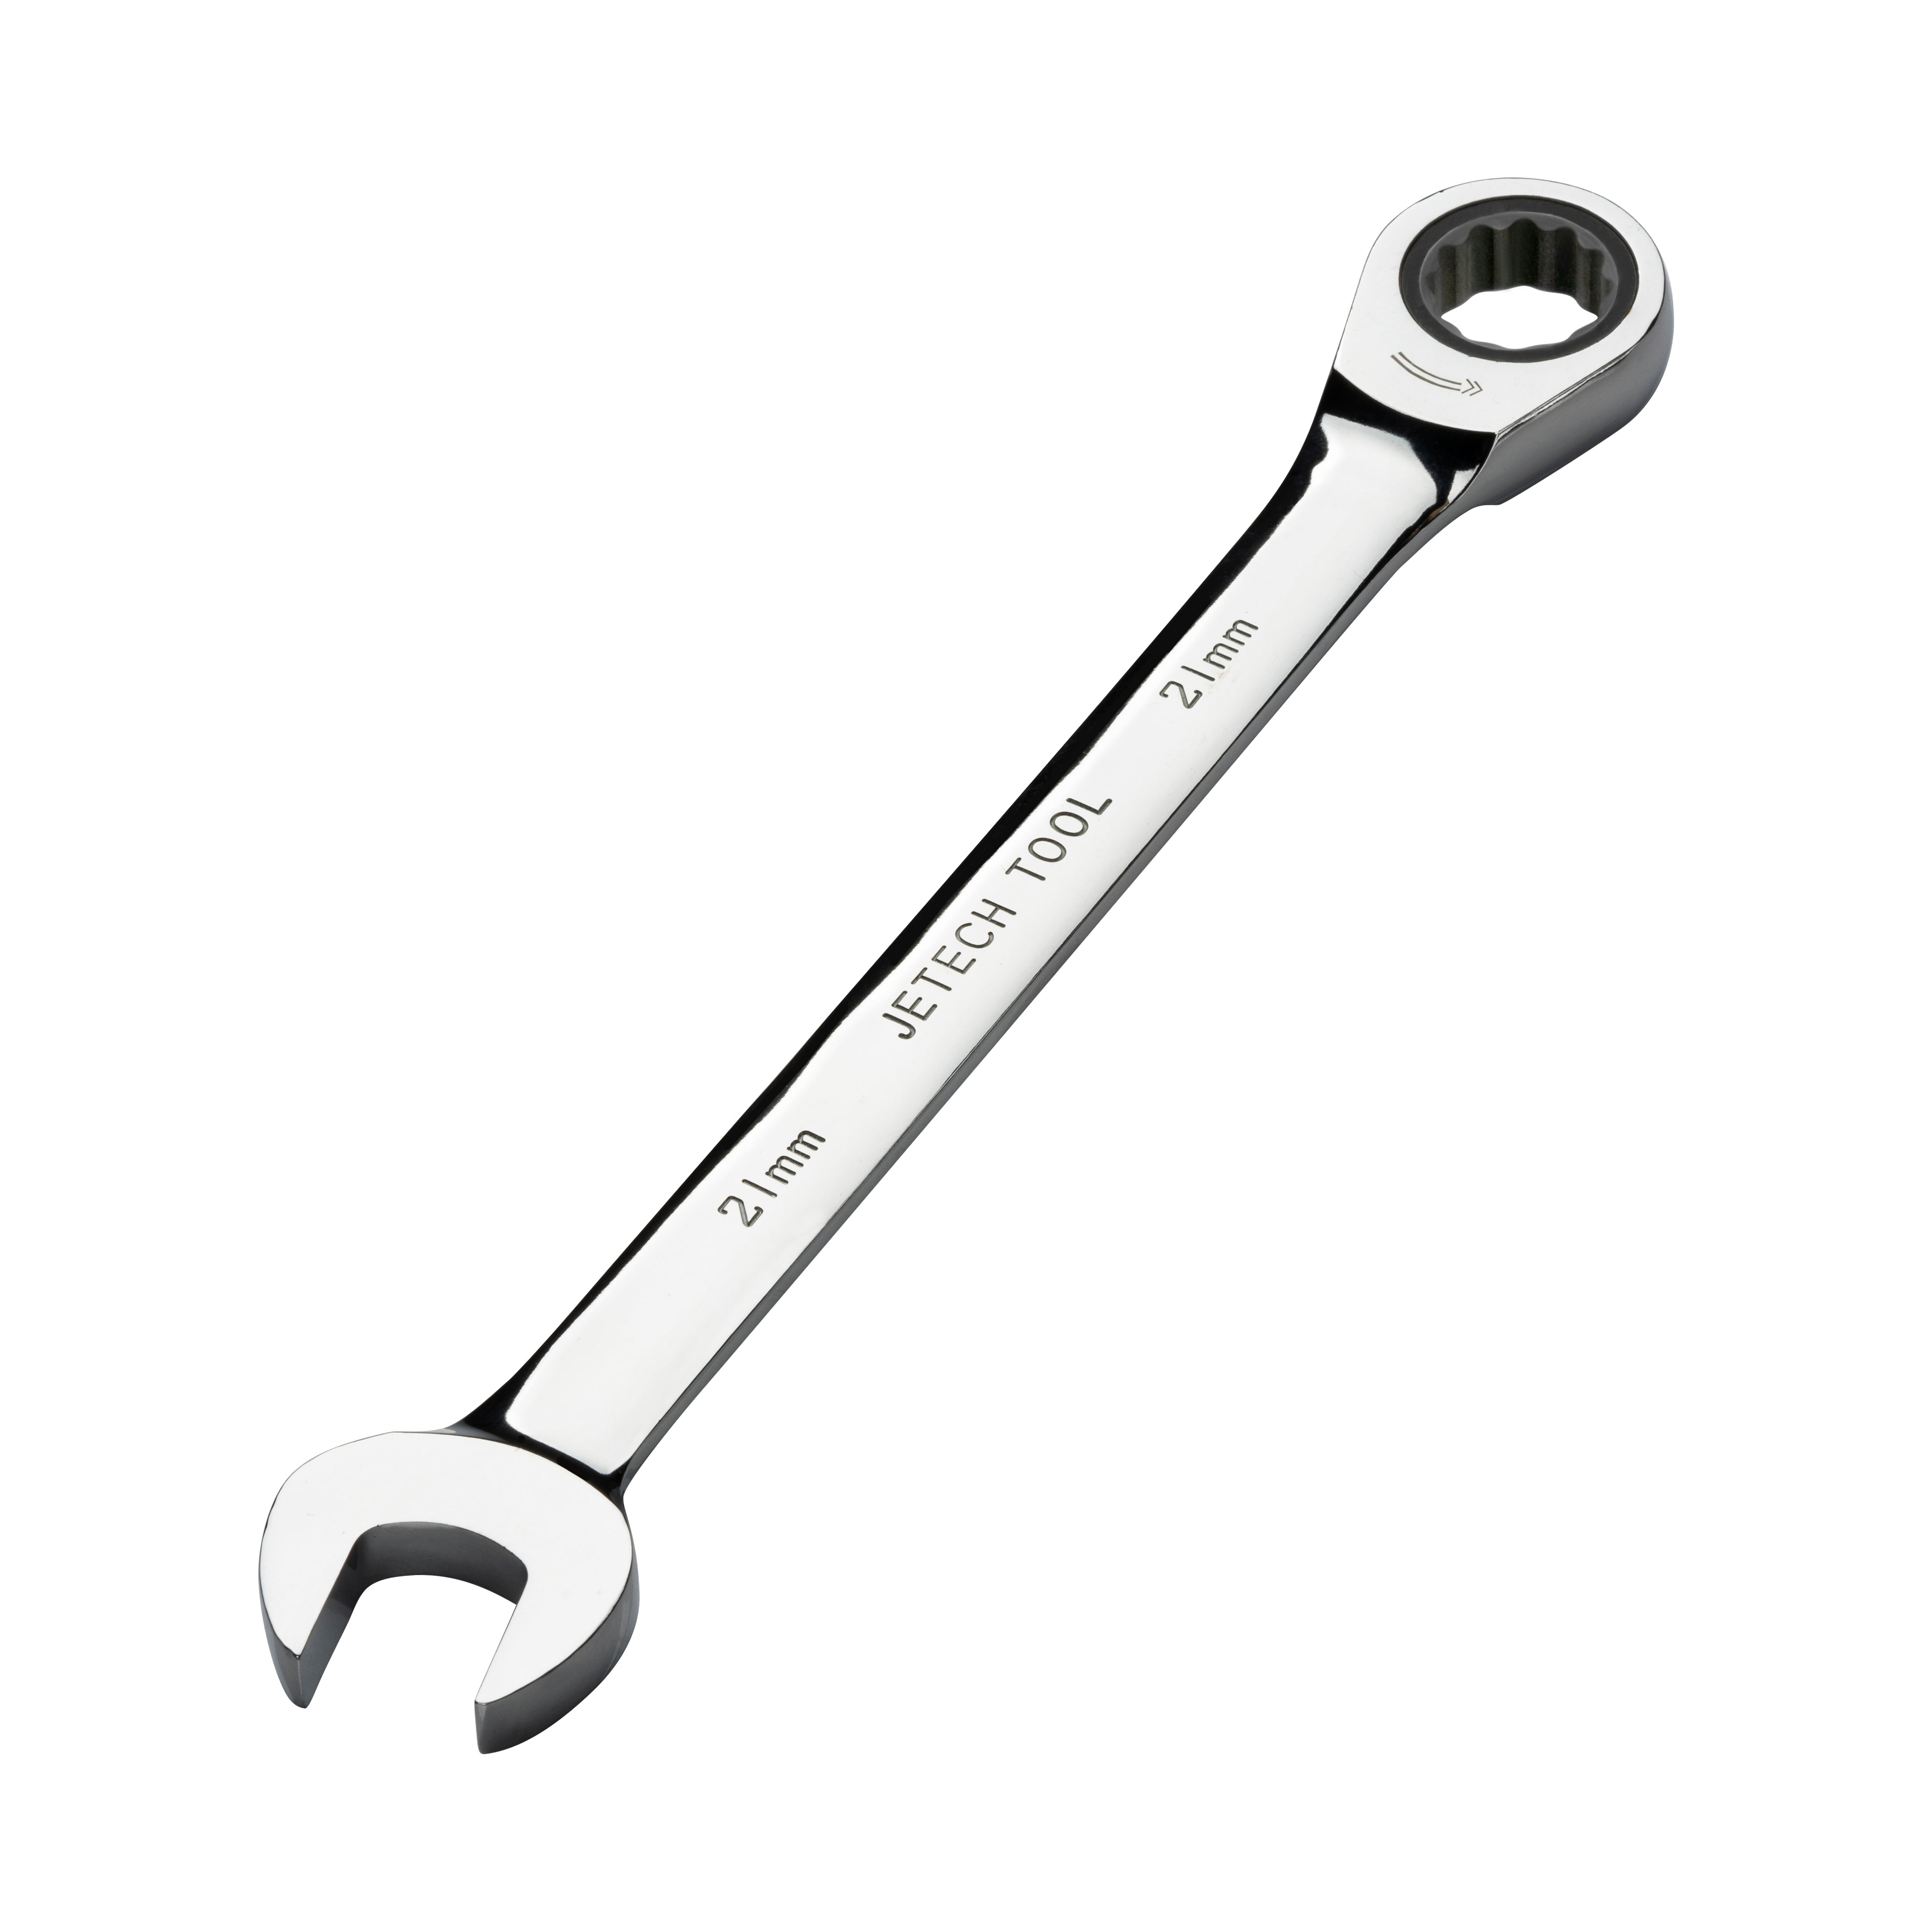 Jetech 21mm Ratcheting Combination Wrench, Metric